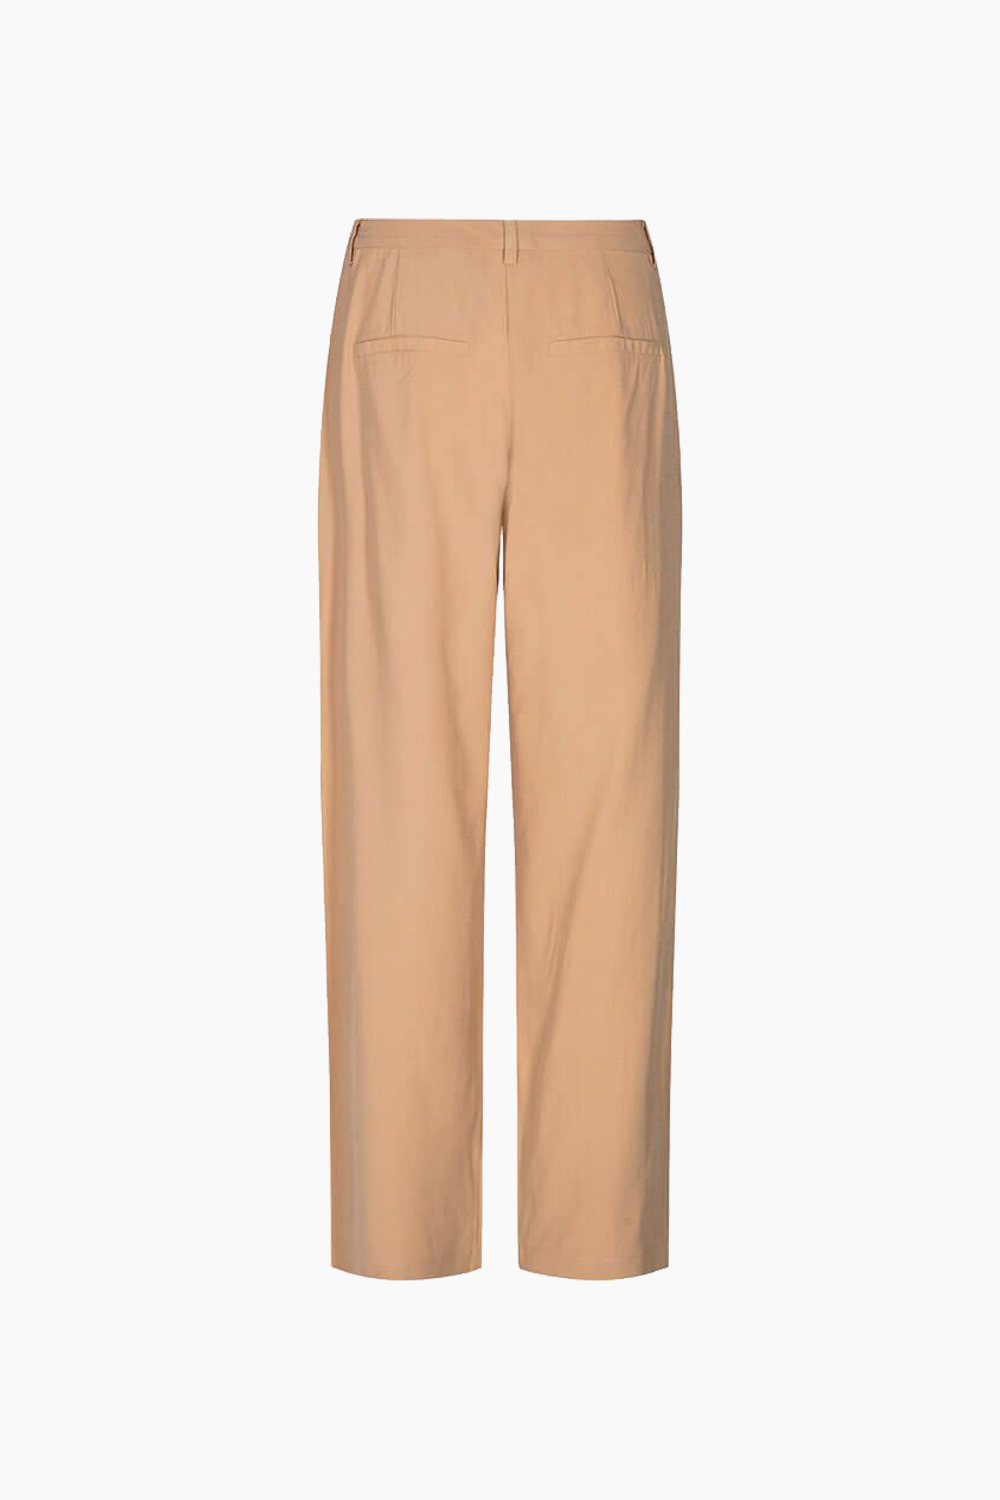 Nimma Trousers - Camel - Moves